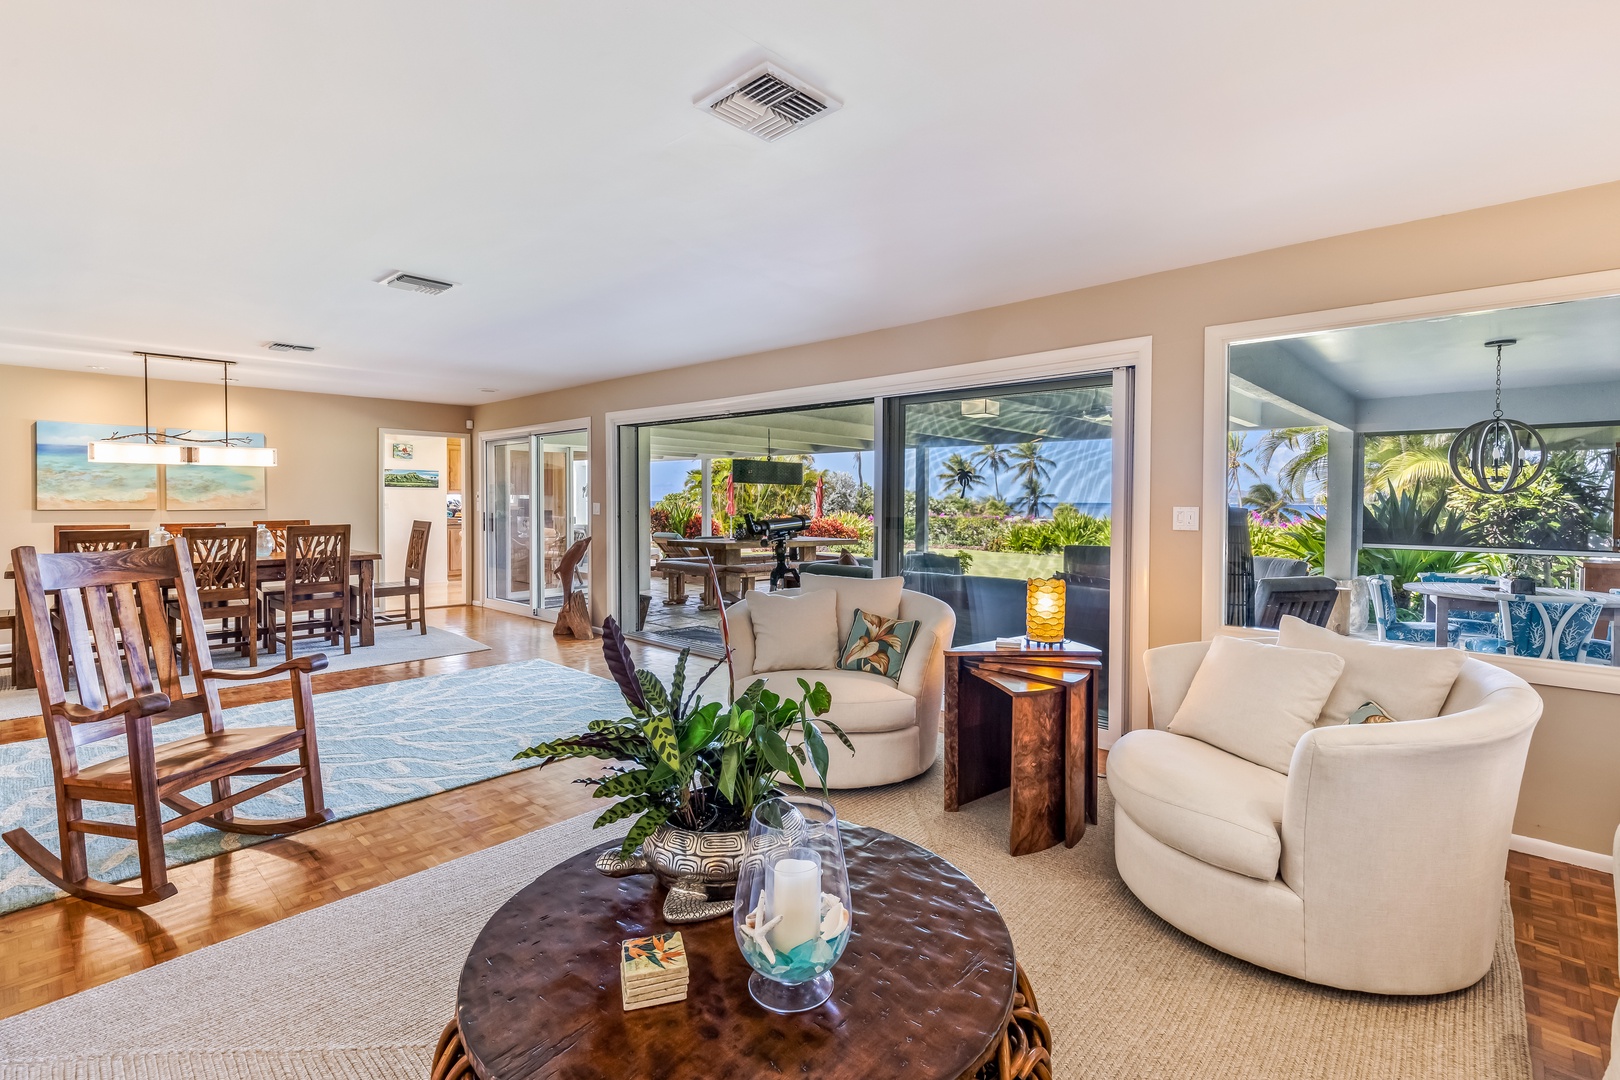 Honolulu Vacation Rentals, Hale Ola - The thoughtfully designed floor plan features a family room, office, living room, and dining room, all gracefully interconnected by a multitude of alluring lanais